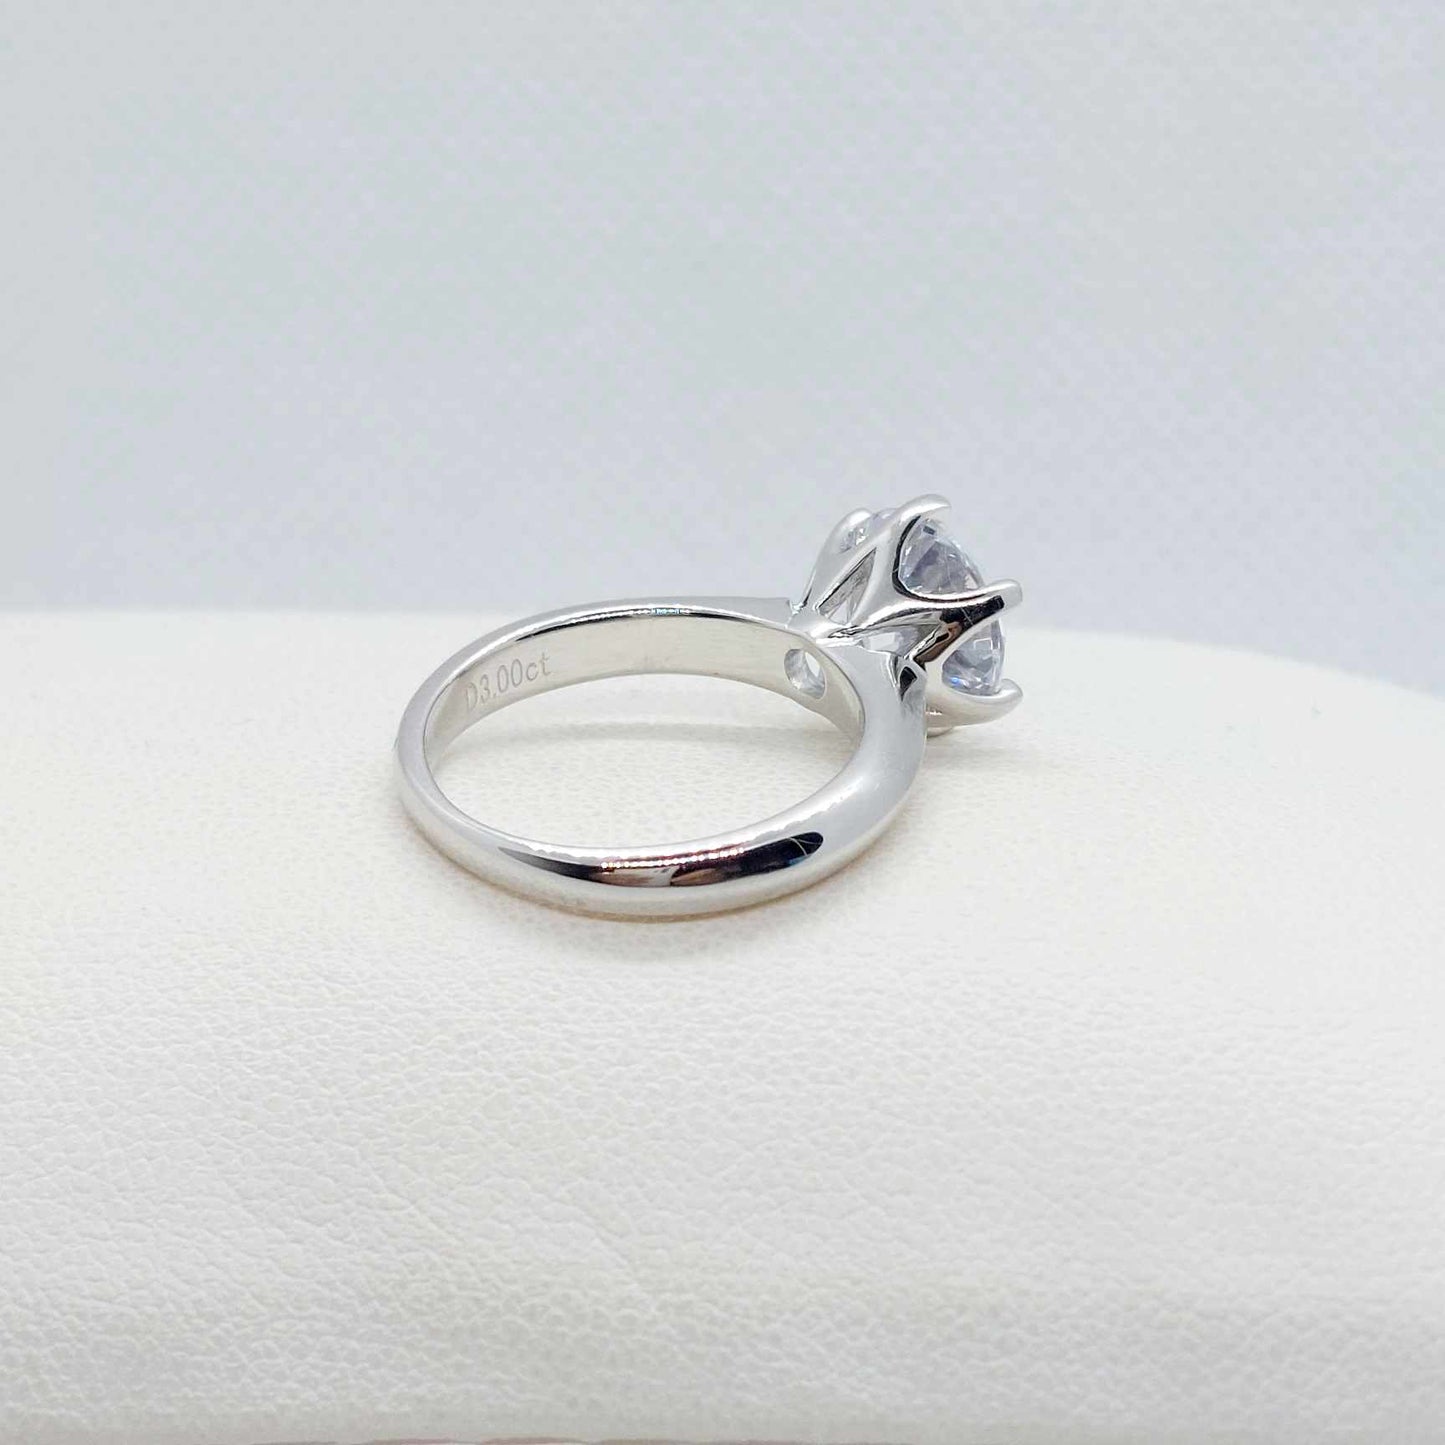 Sona Diamond 3ct Ring in Sterling Silver Lab Created